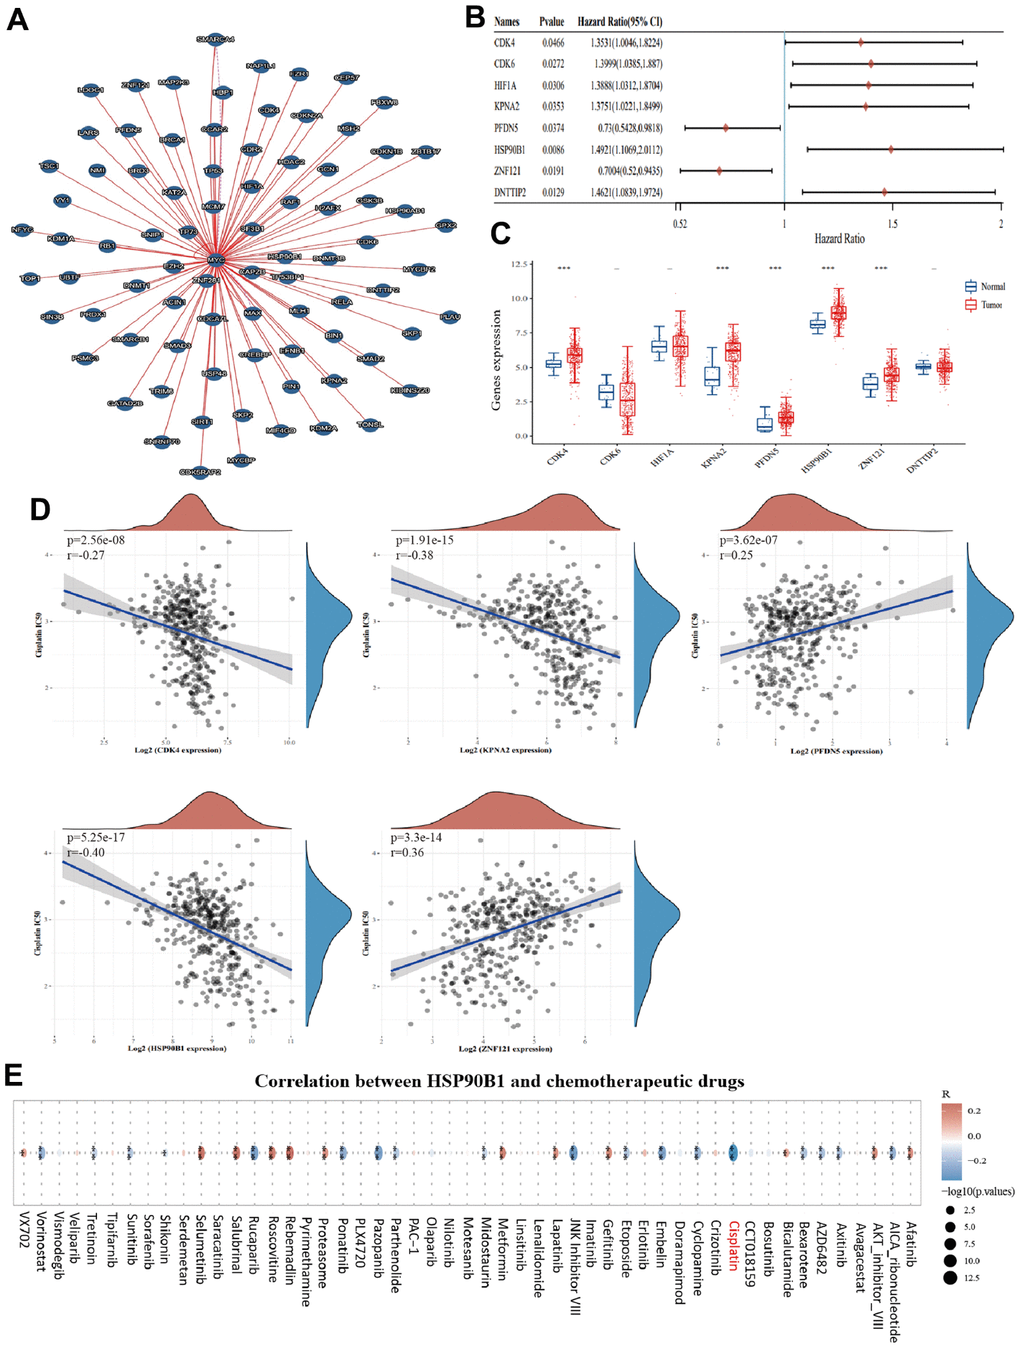 HSP90B1 is significantly associated with cisplatin chemotherapy in bladder cancer. (A) Interaction network map of c-Myc with other genes. (B) Forest plot of c-Myc interacting genes with prognostic significance in bladder cancer. (C) c-Myc interacting genes with prognostic value expressed in bladder cancer and normal bladder tissues. (D) Five key genes with cisplatin IC50 score for correlation. (E) Correlation of HSP90B1 with chemotherapeutic agents in bladder cancer.